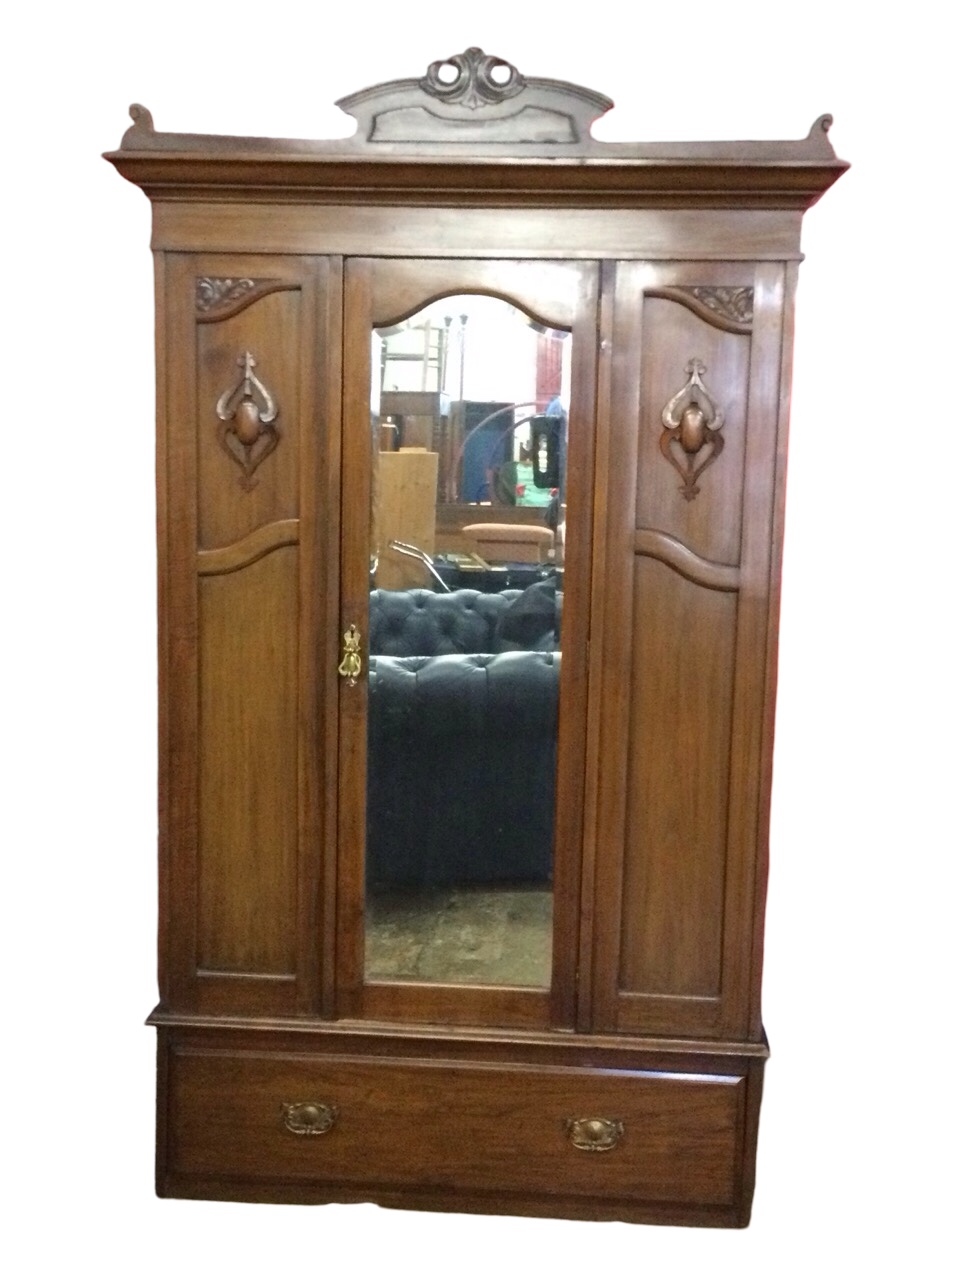 An Edwardian mahogany CWS Pelaw wardrobe and dressing table, the robe with pediment and moulded - Image 3 of 3